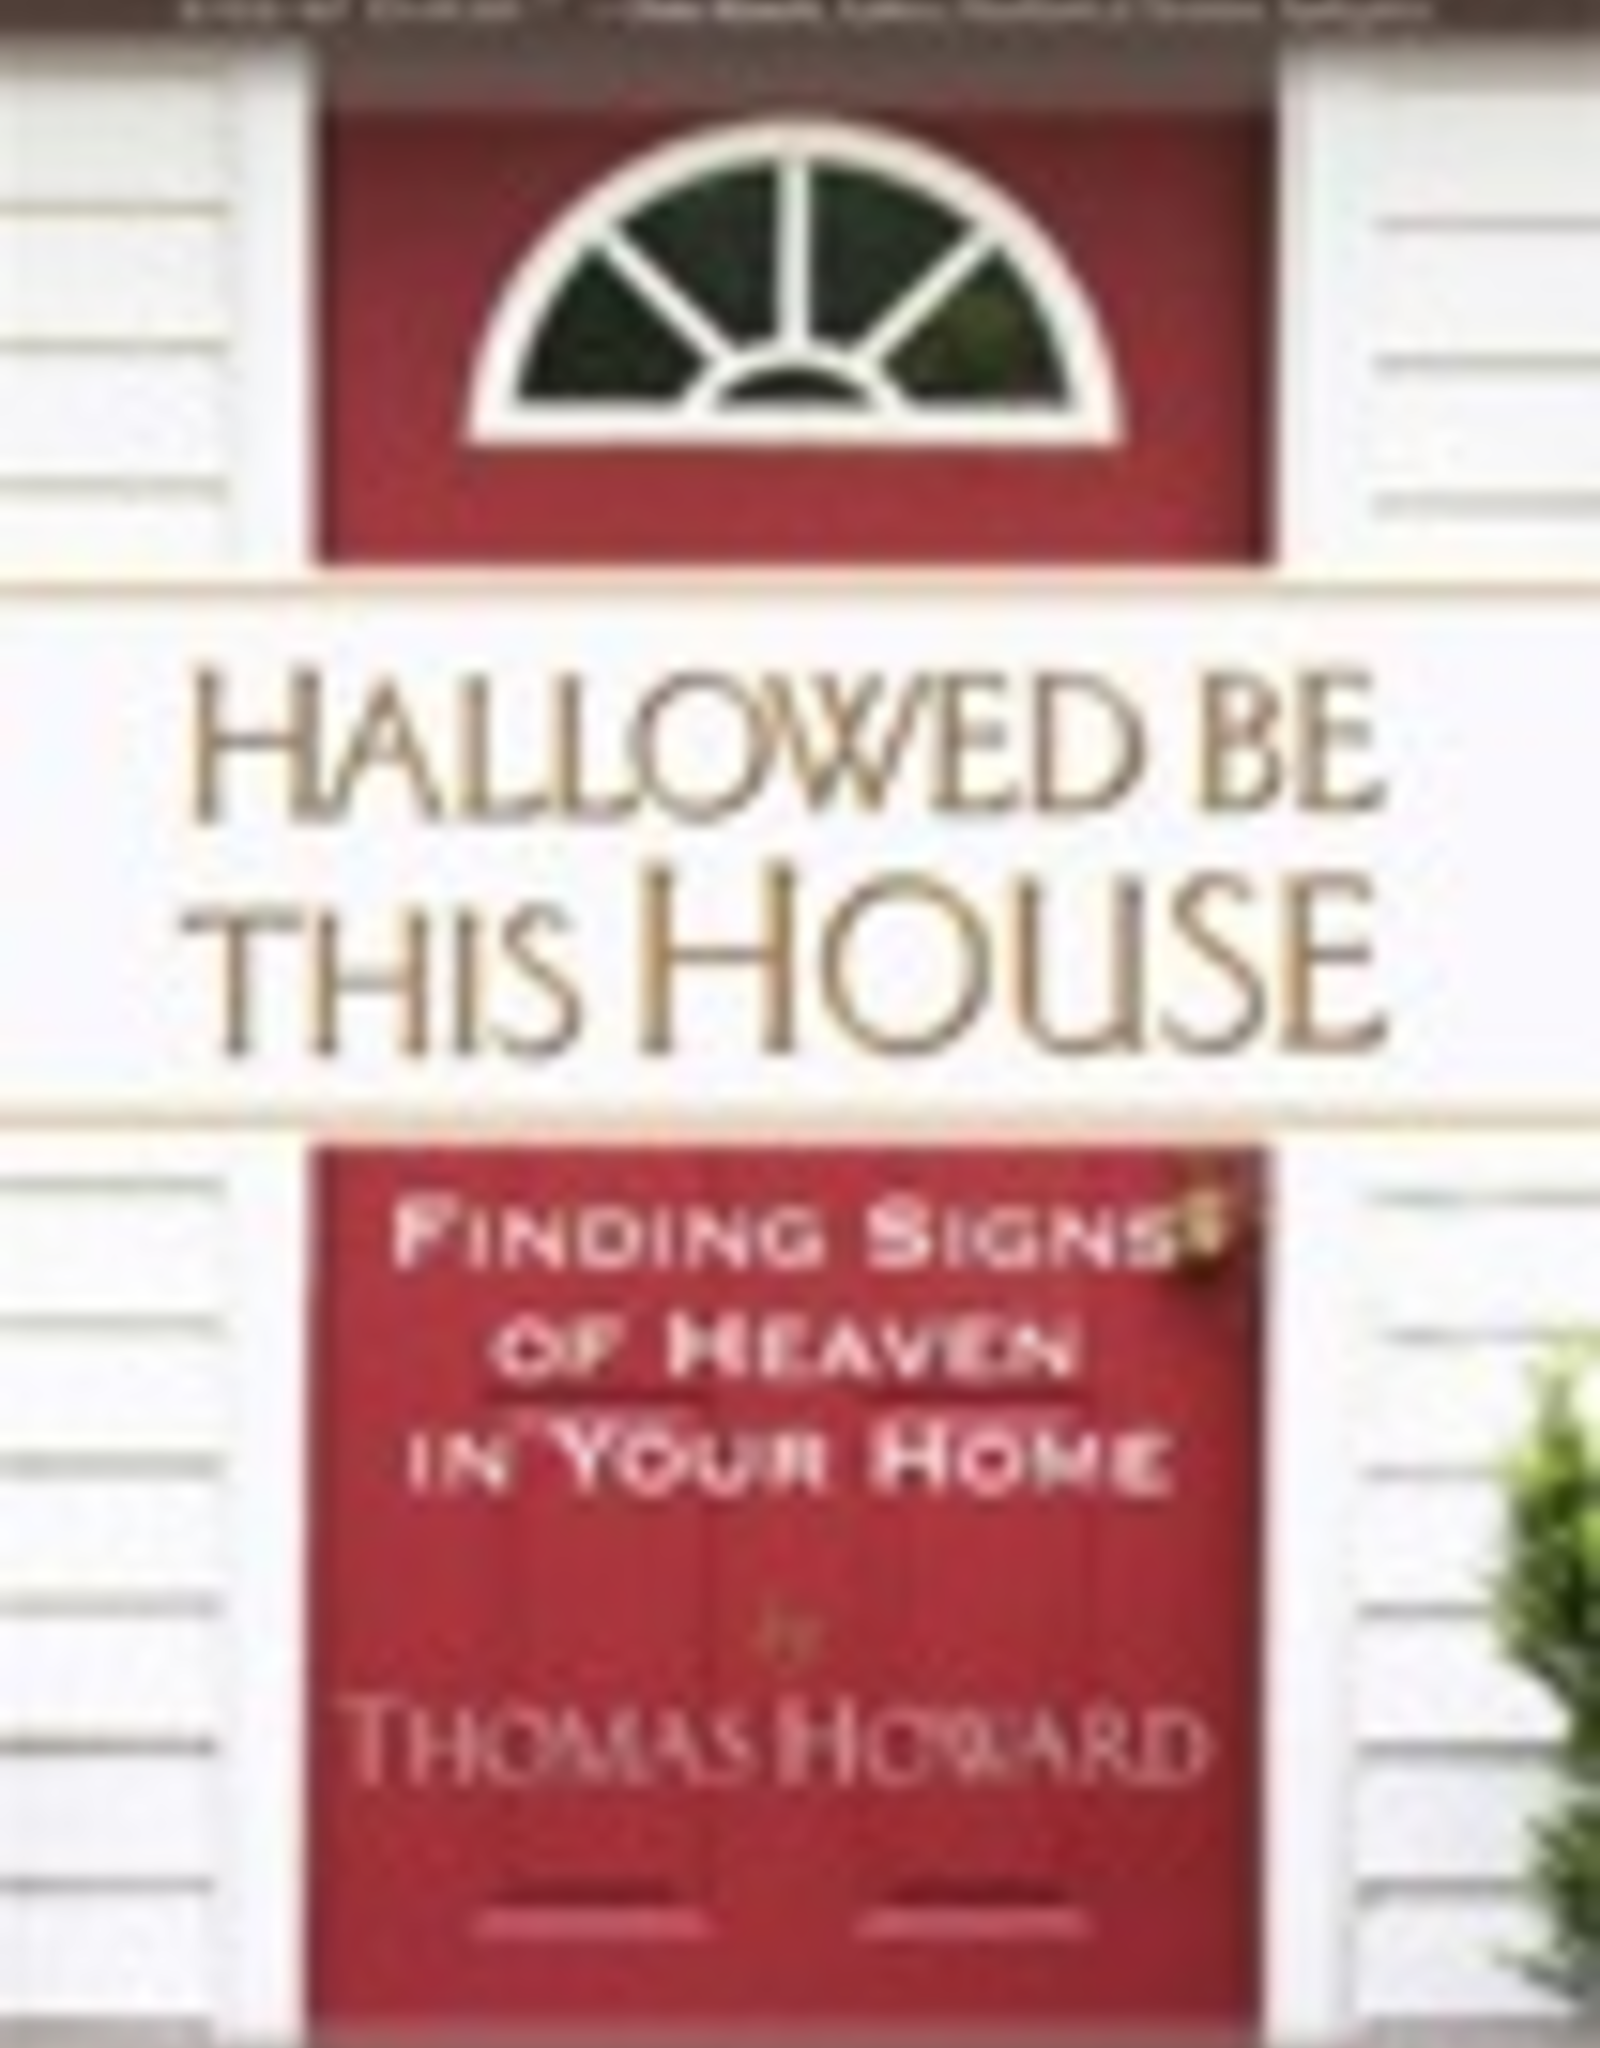 Ignatius Press Hallowed Be This House:  Finding Signs of Heaven in Your Home, by Thomas Howard (paperback)